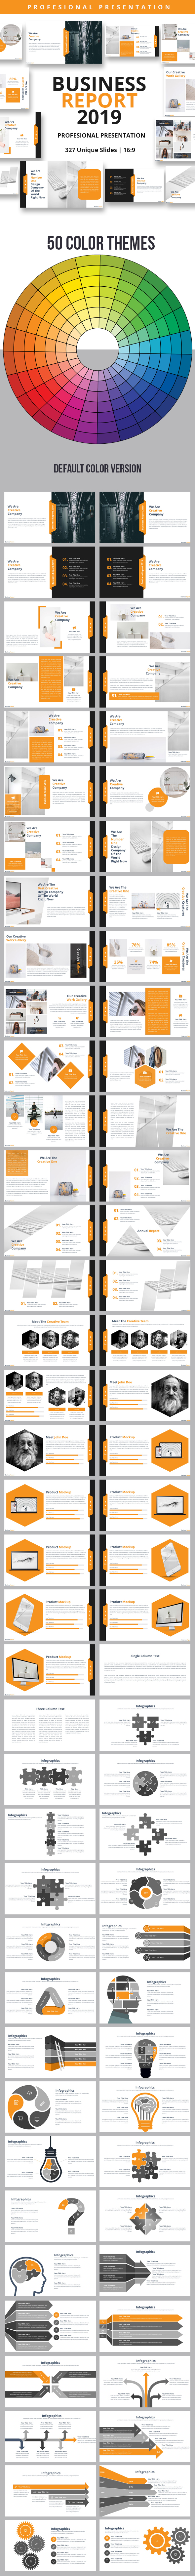 Business Report 2019 Powerpoint Presentation Template